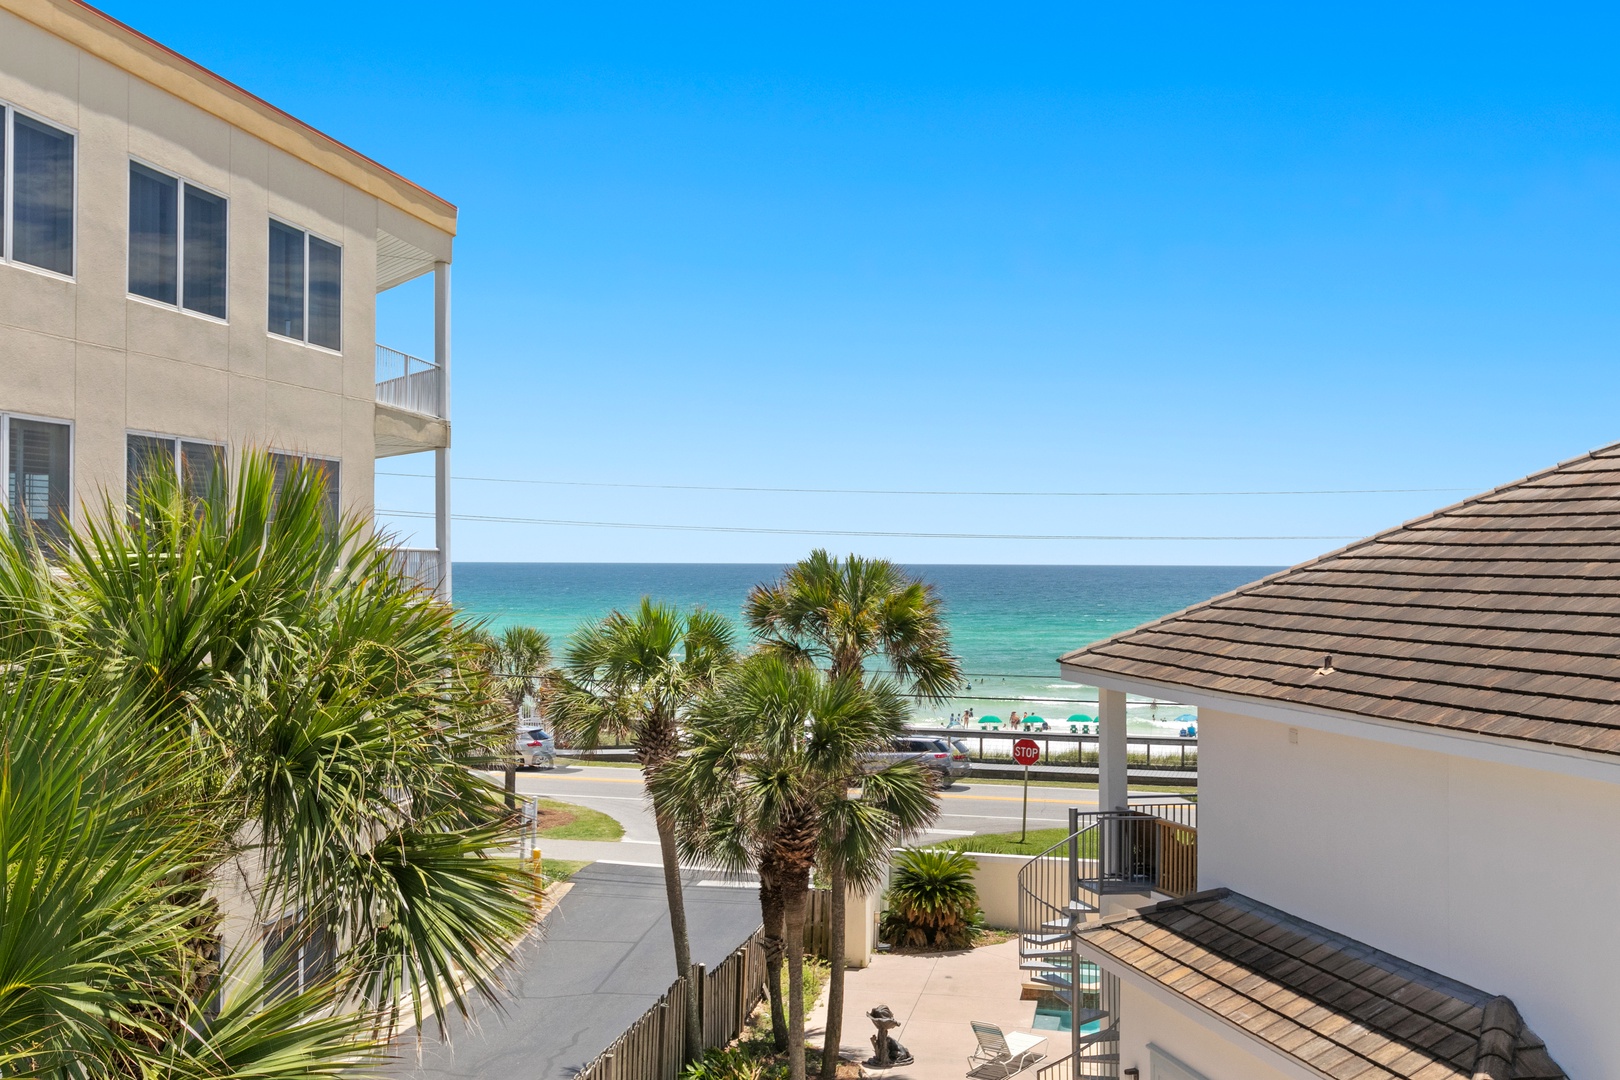 Gulf views from the 3rd floor balcony!